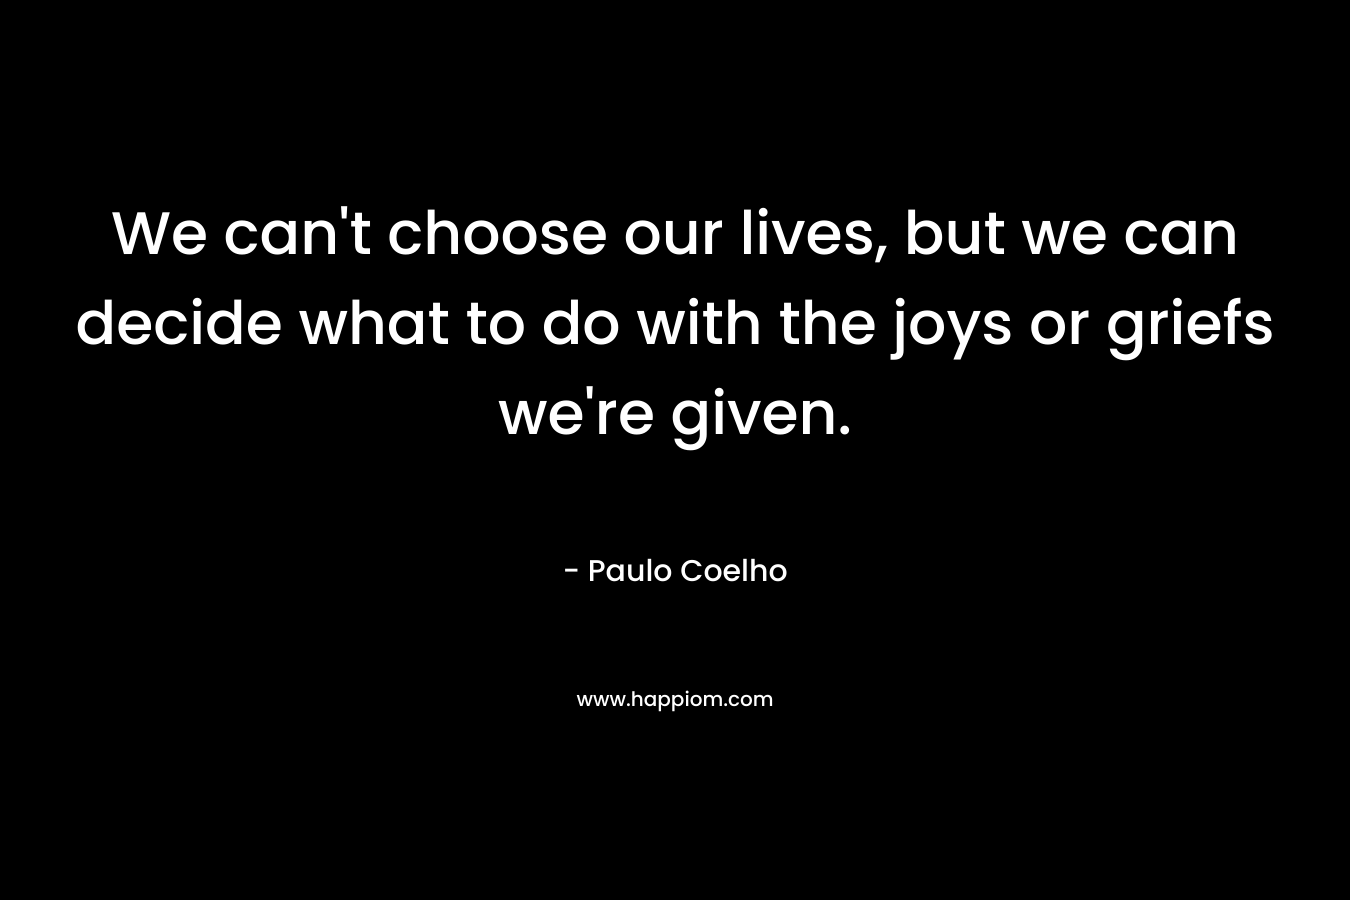 We can't choose our lives, but we can decide what to do with the joys or griefs we're given.